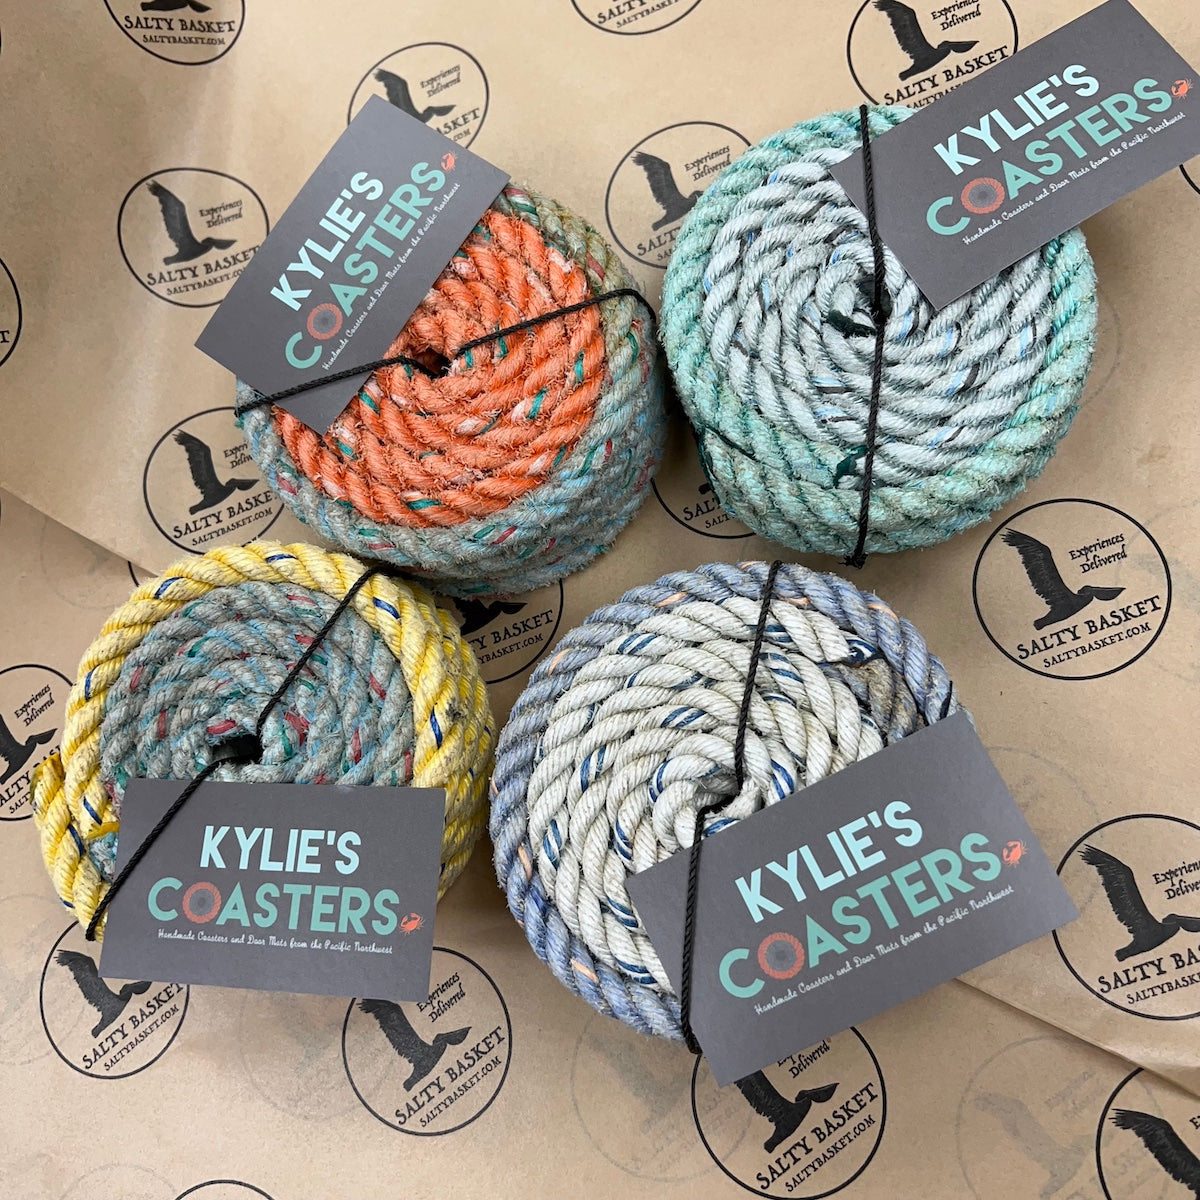 Rip Current Weaving - Kylies Crab Line Products